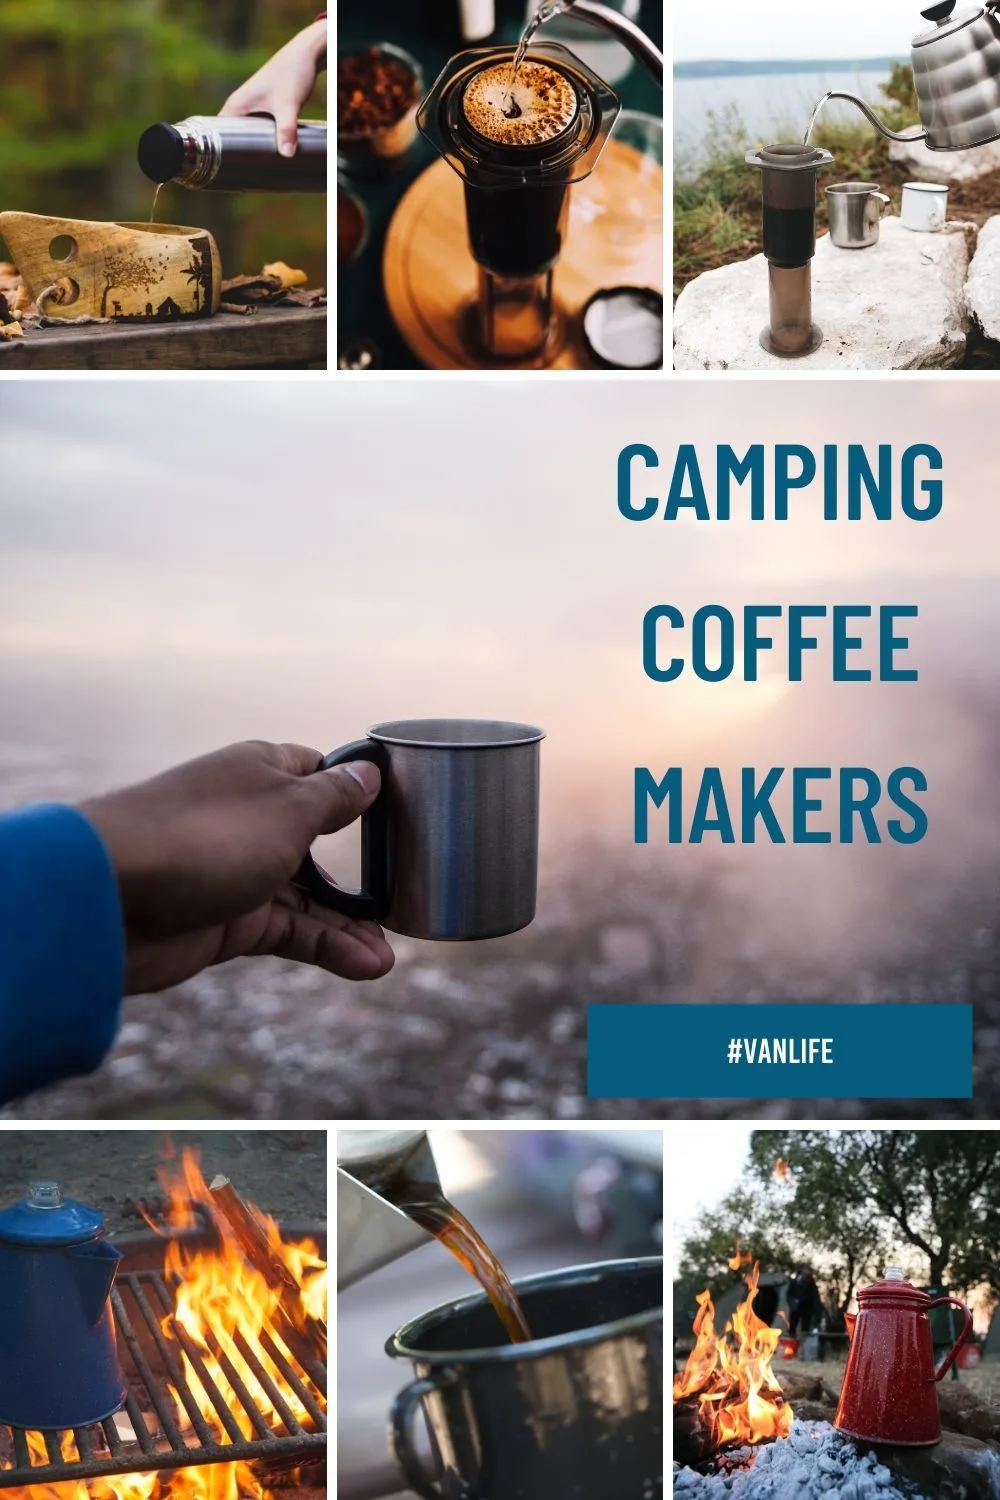 8 Best Camping Coffee Makers for campervans, van life, rv living & camping for pinterest